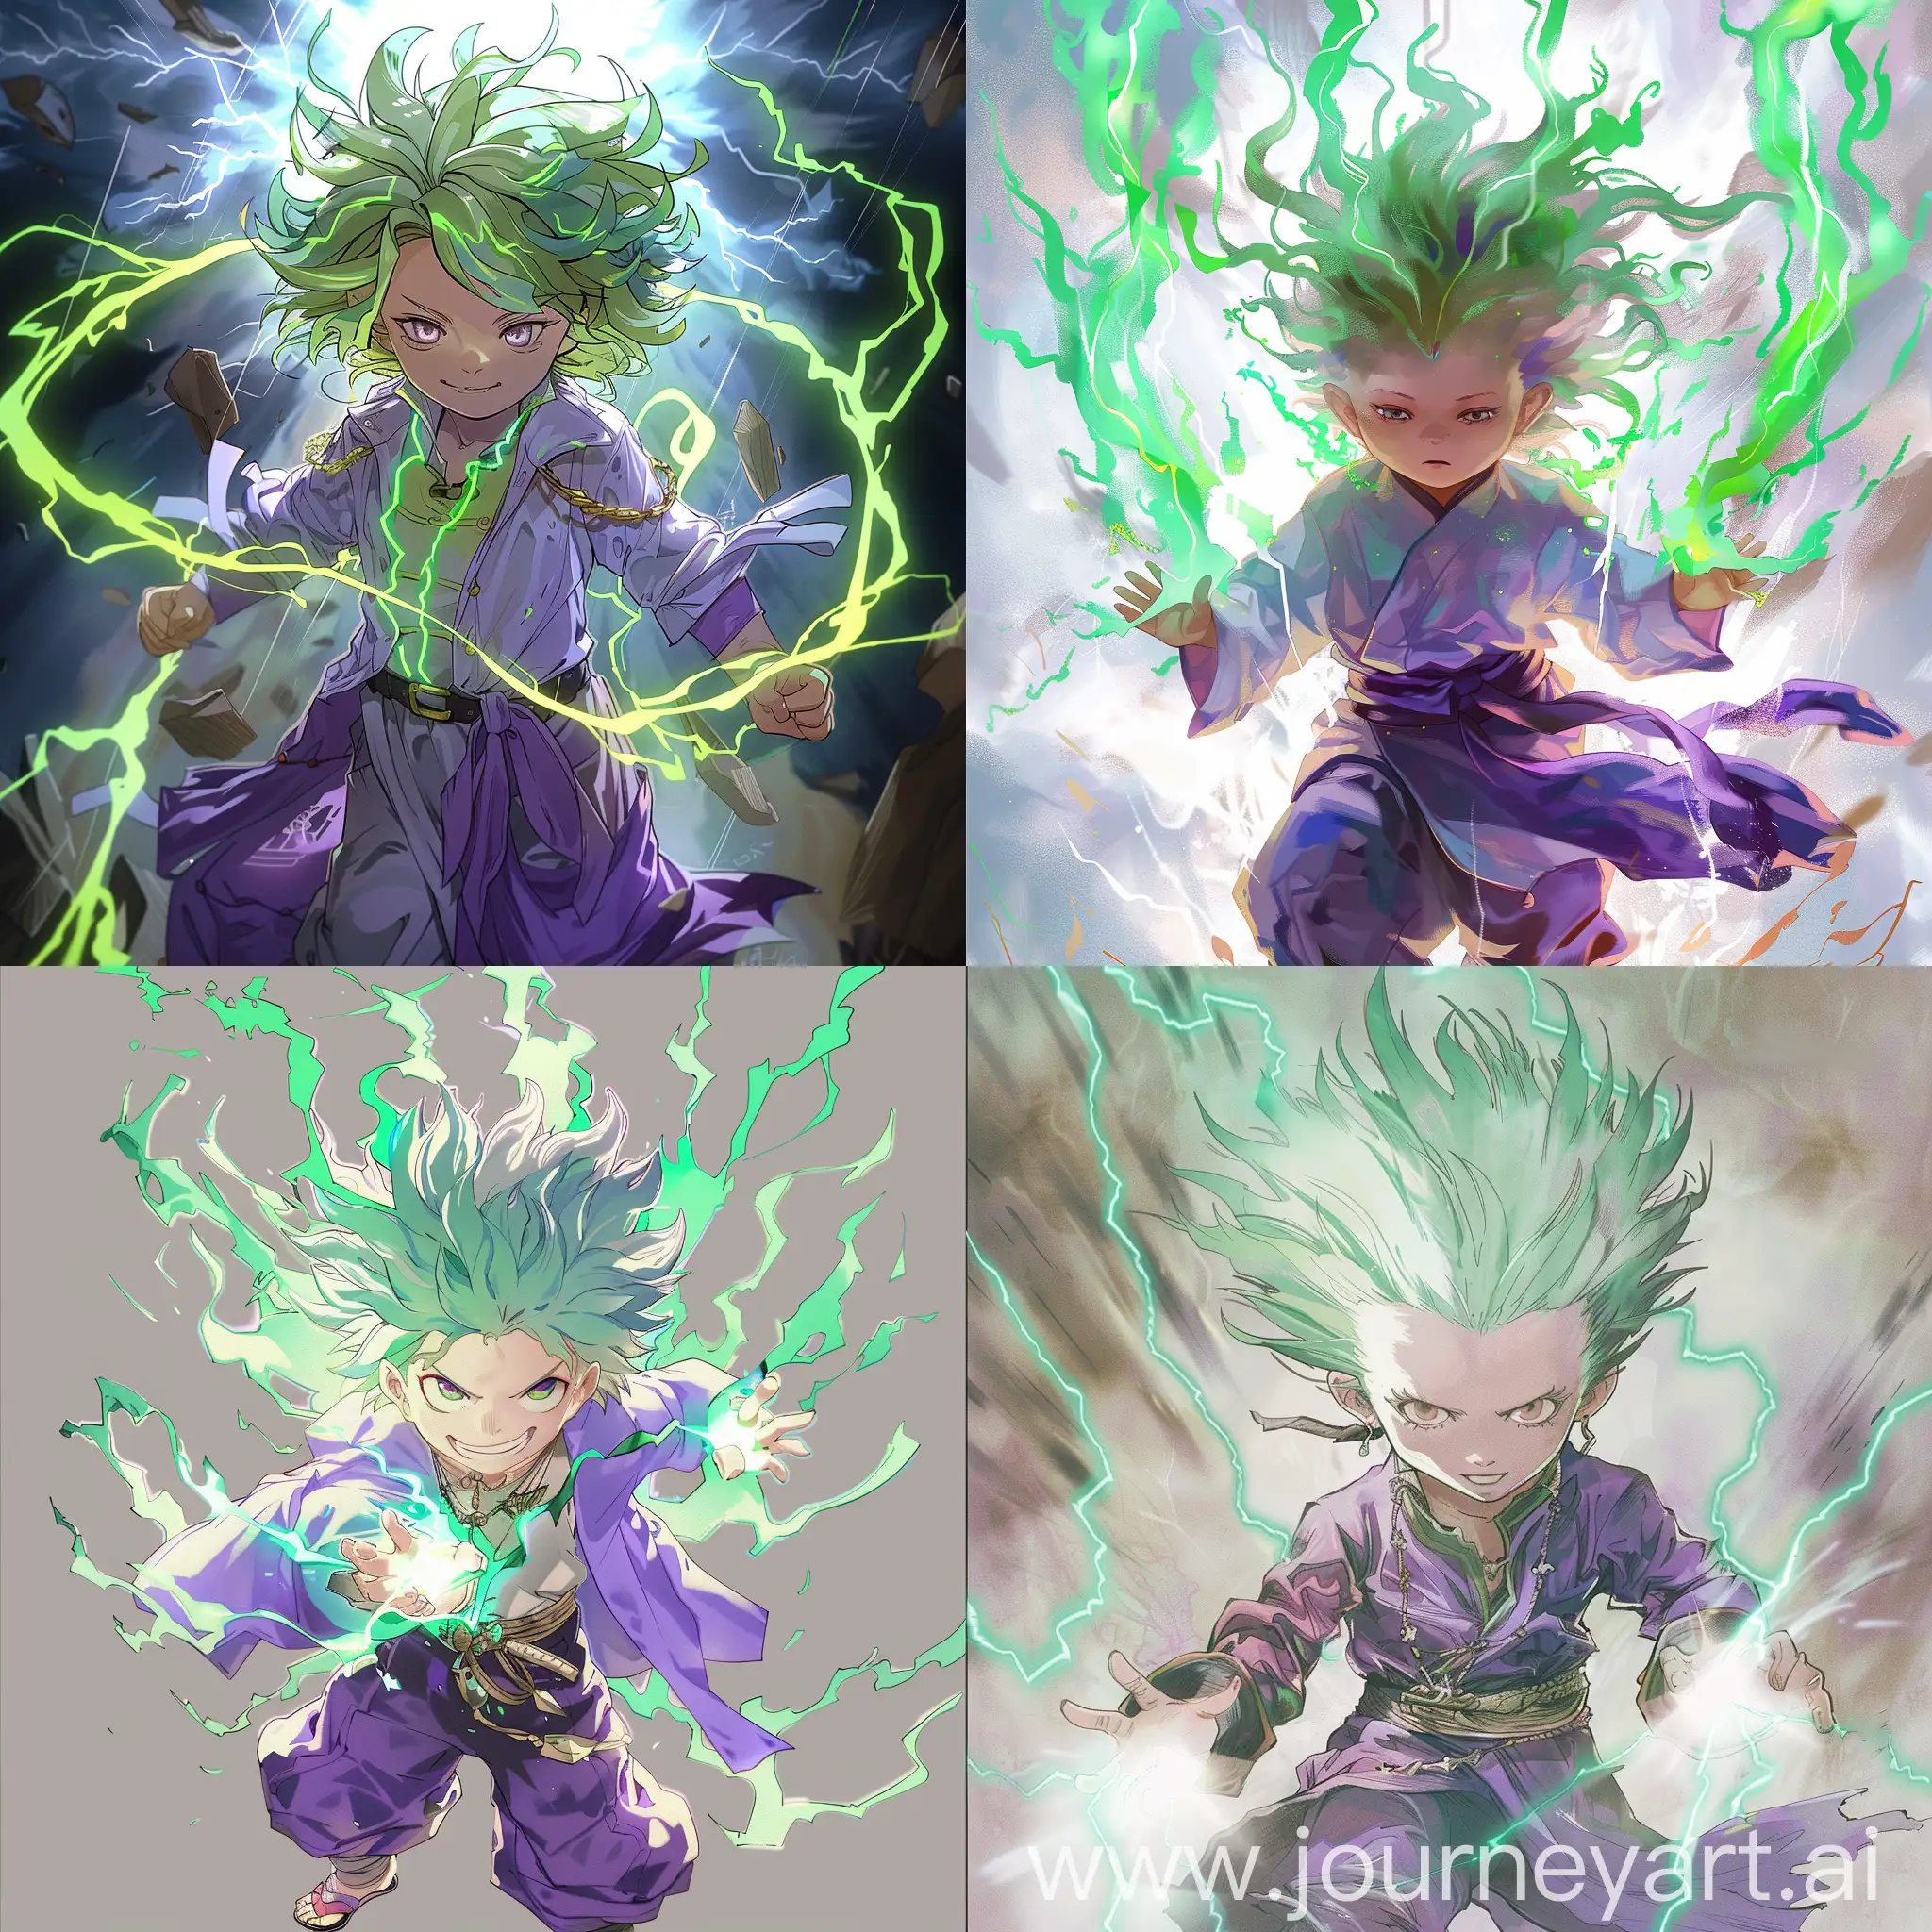 An anime style powerful transformation of a light child, with a green lightning hair and purple clothes, from a fantasy novel.